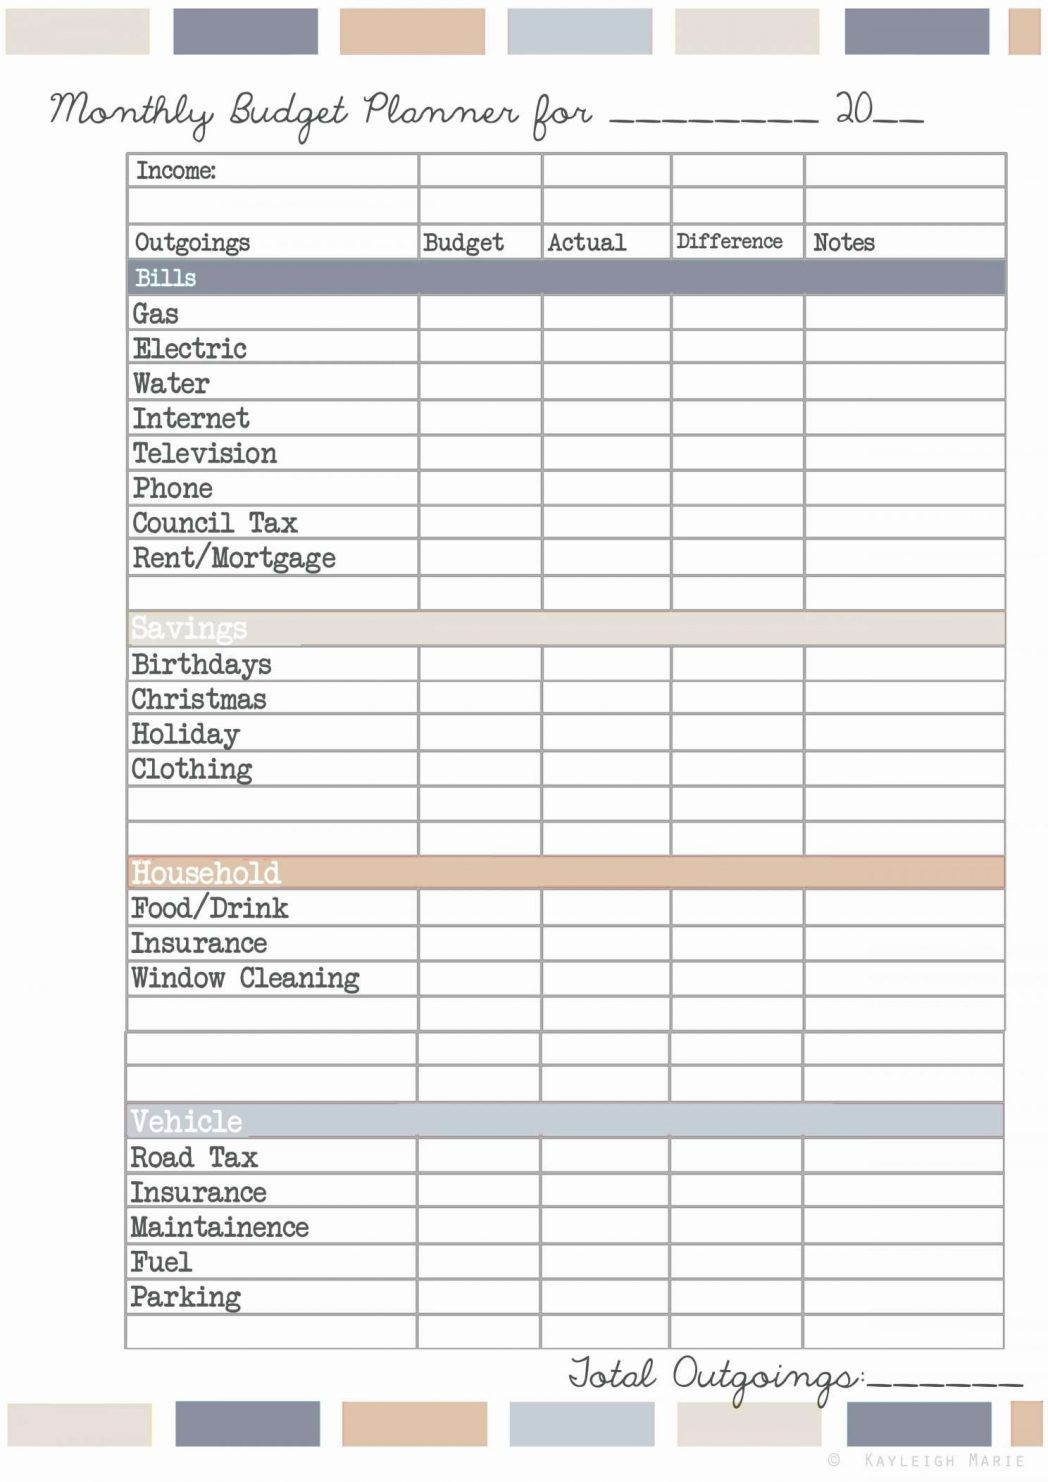 Buying A House Spreadsheet Throughout Buying A House Budget Spreadsheet Collections Home Fr ~ Epaperzone